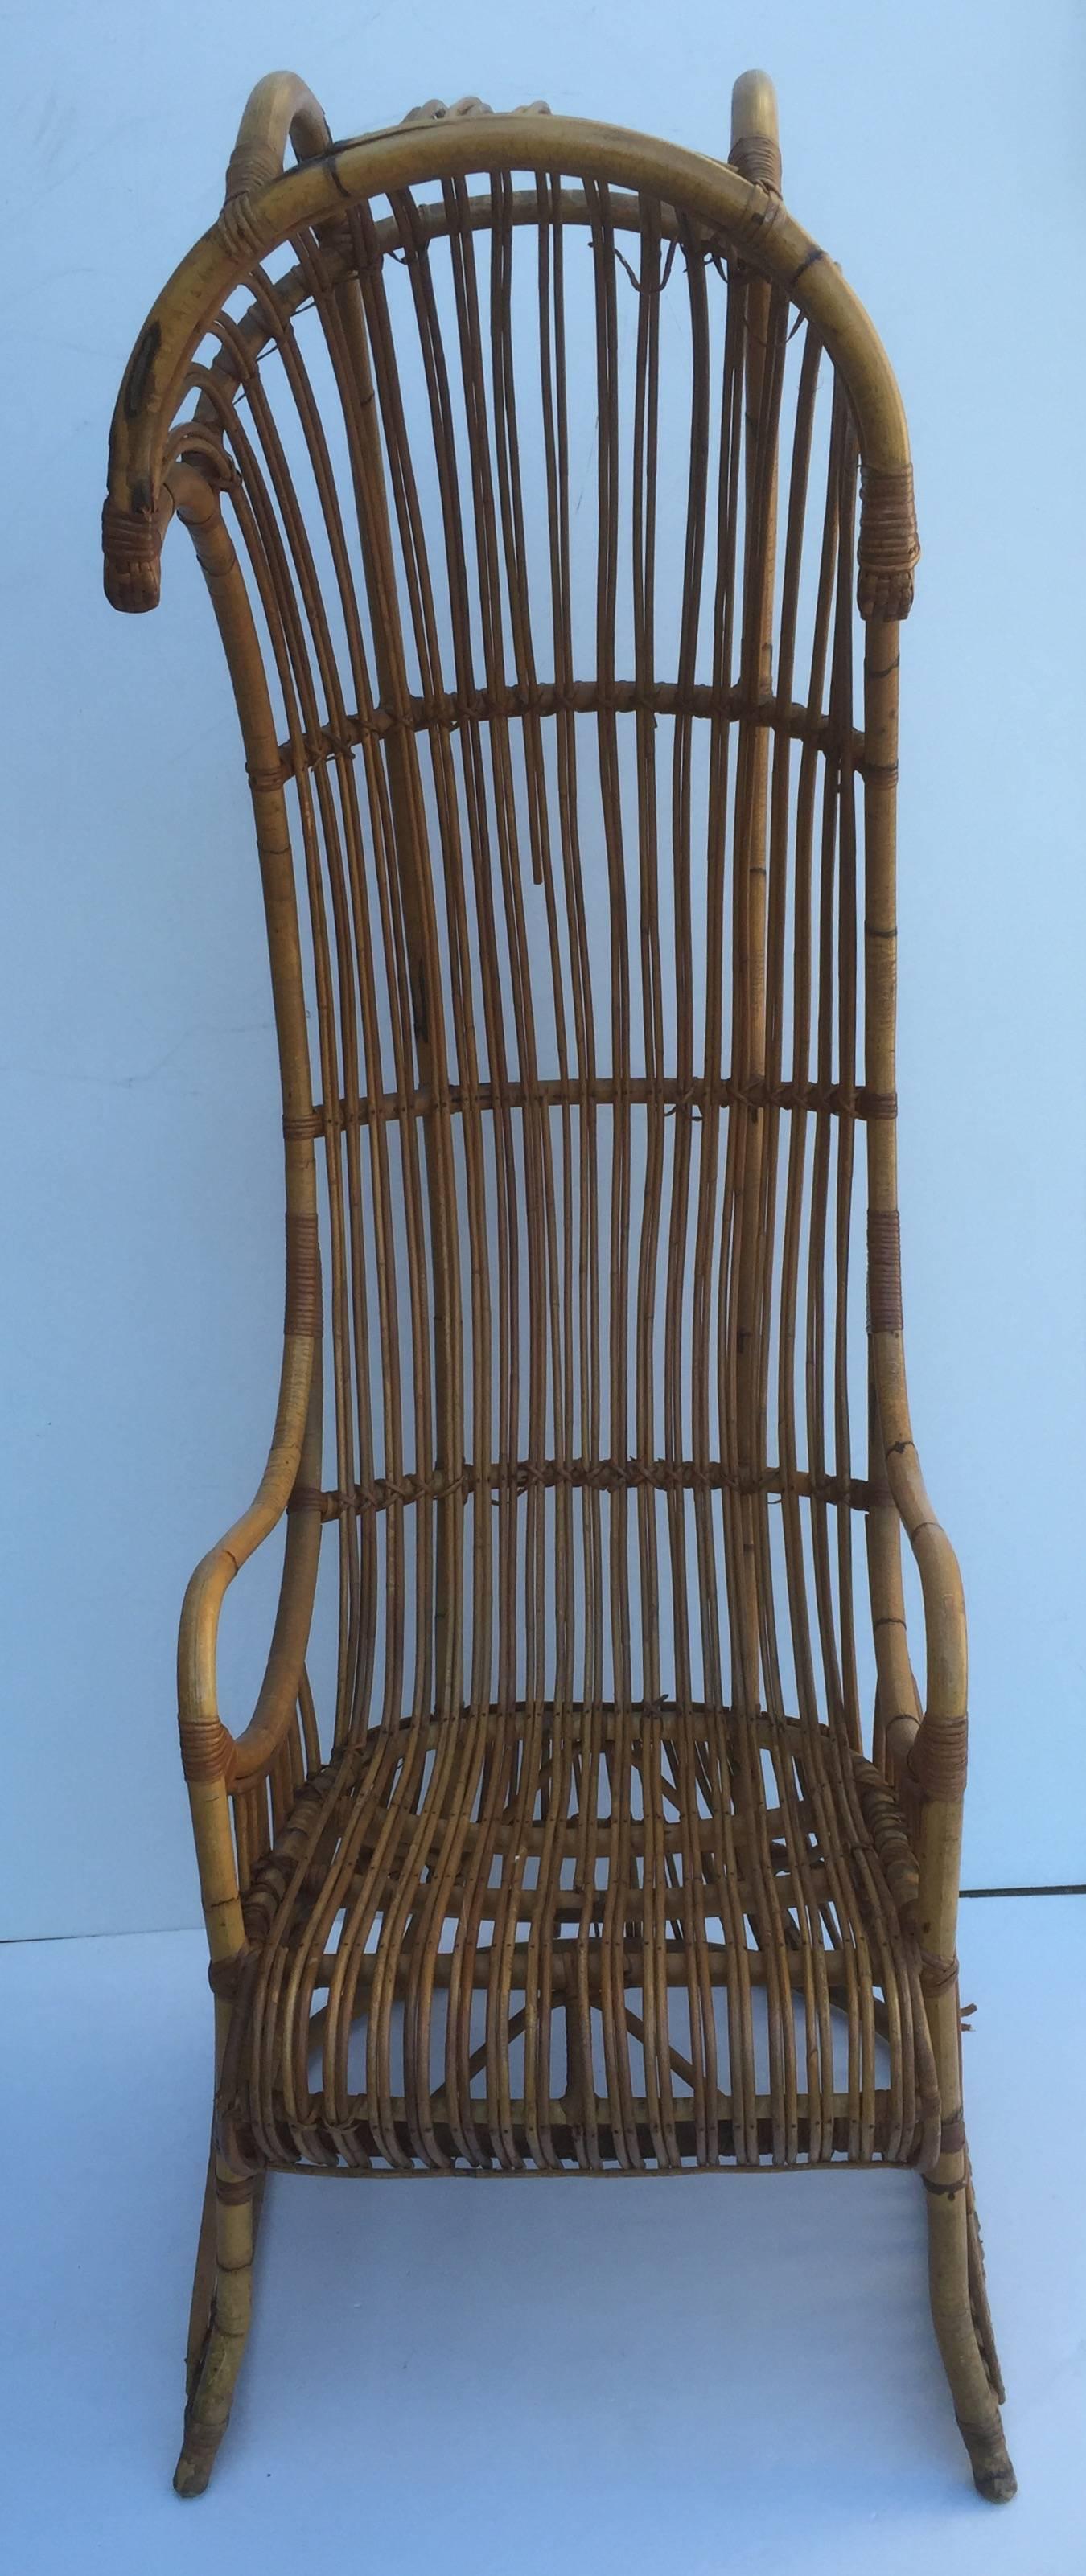 Rattan canopy chair, perfect for accent or a sunroom.